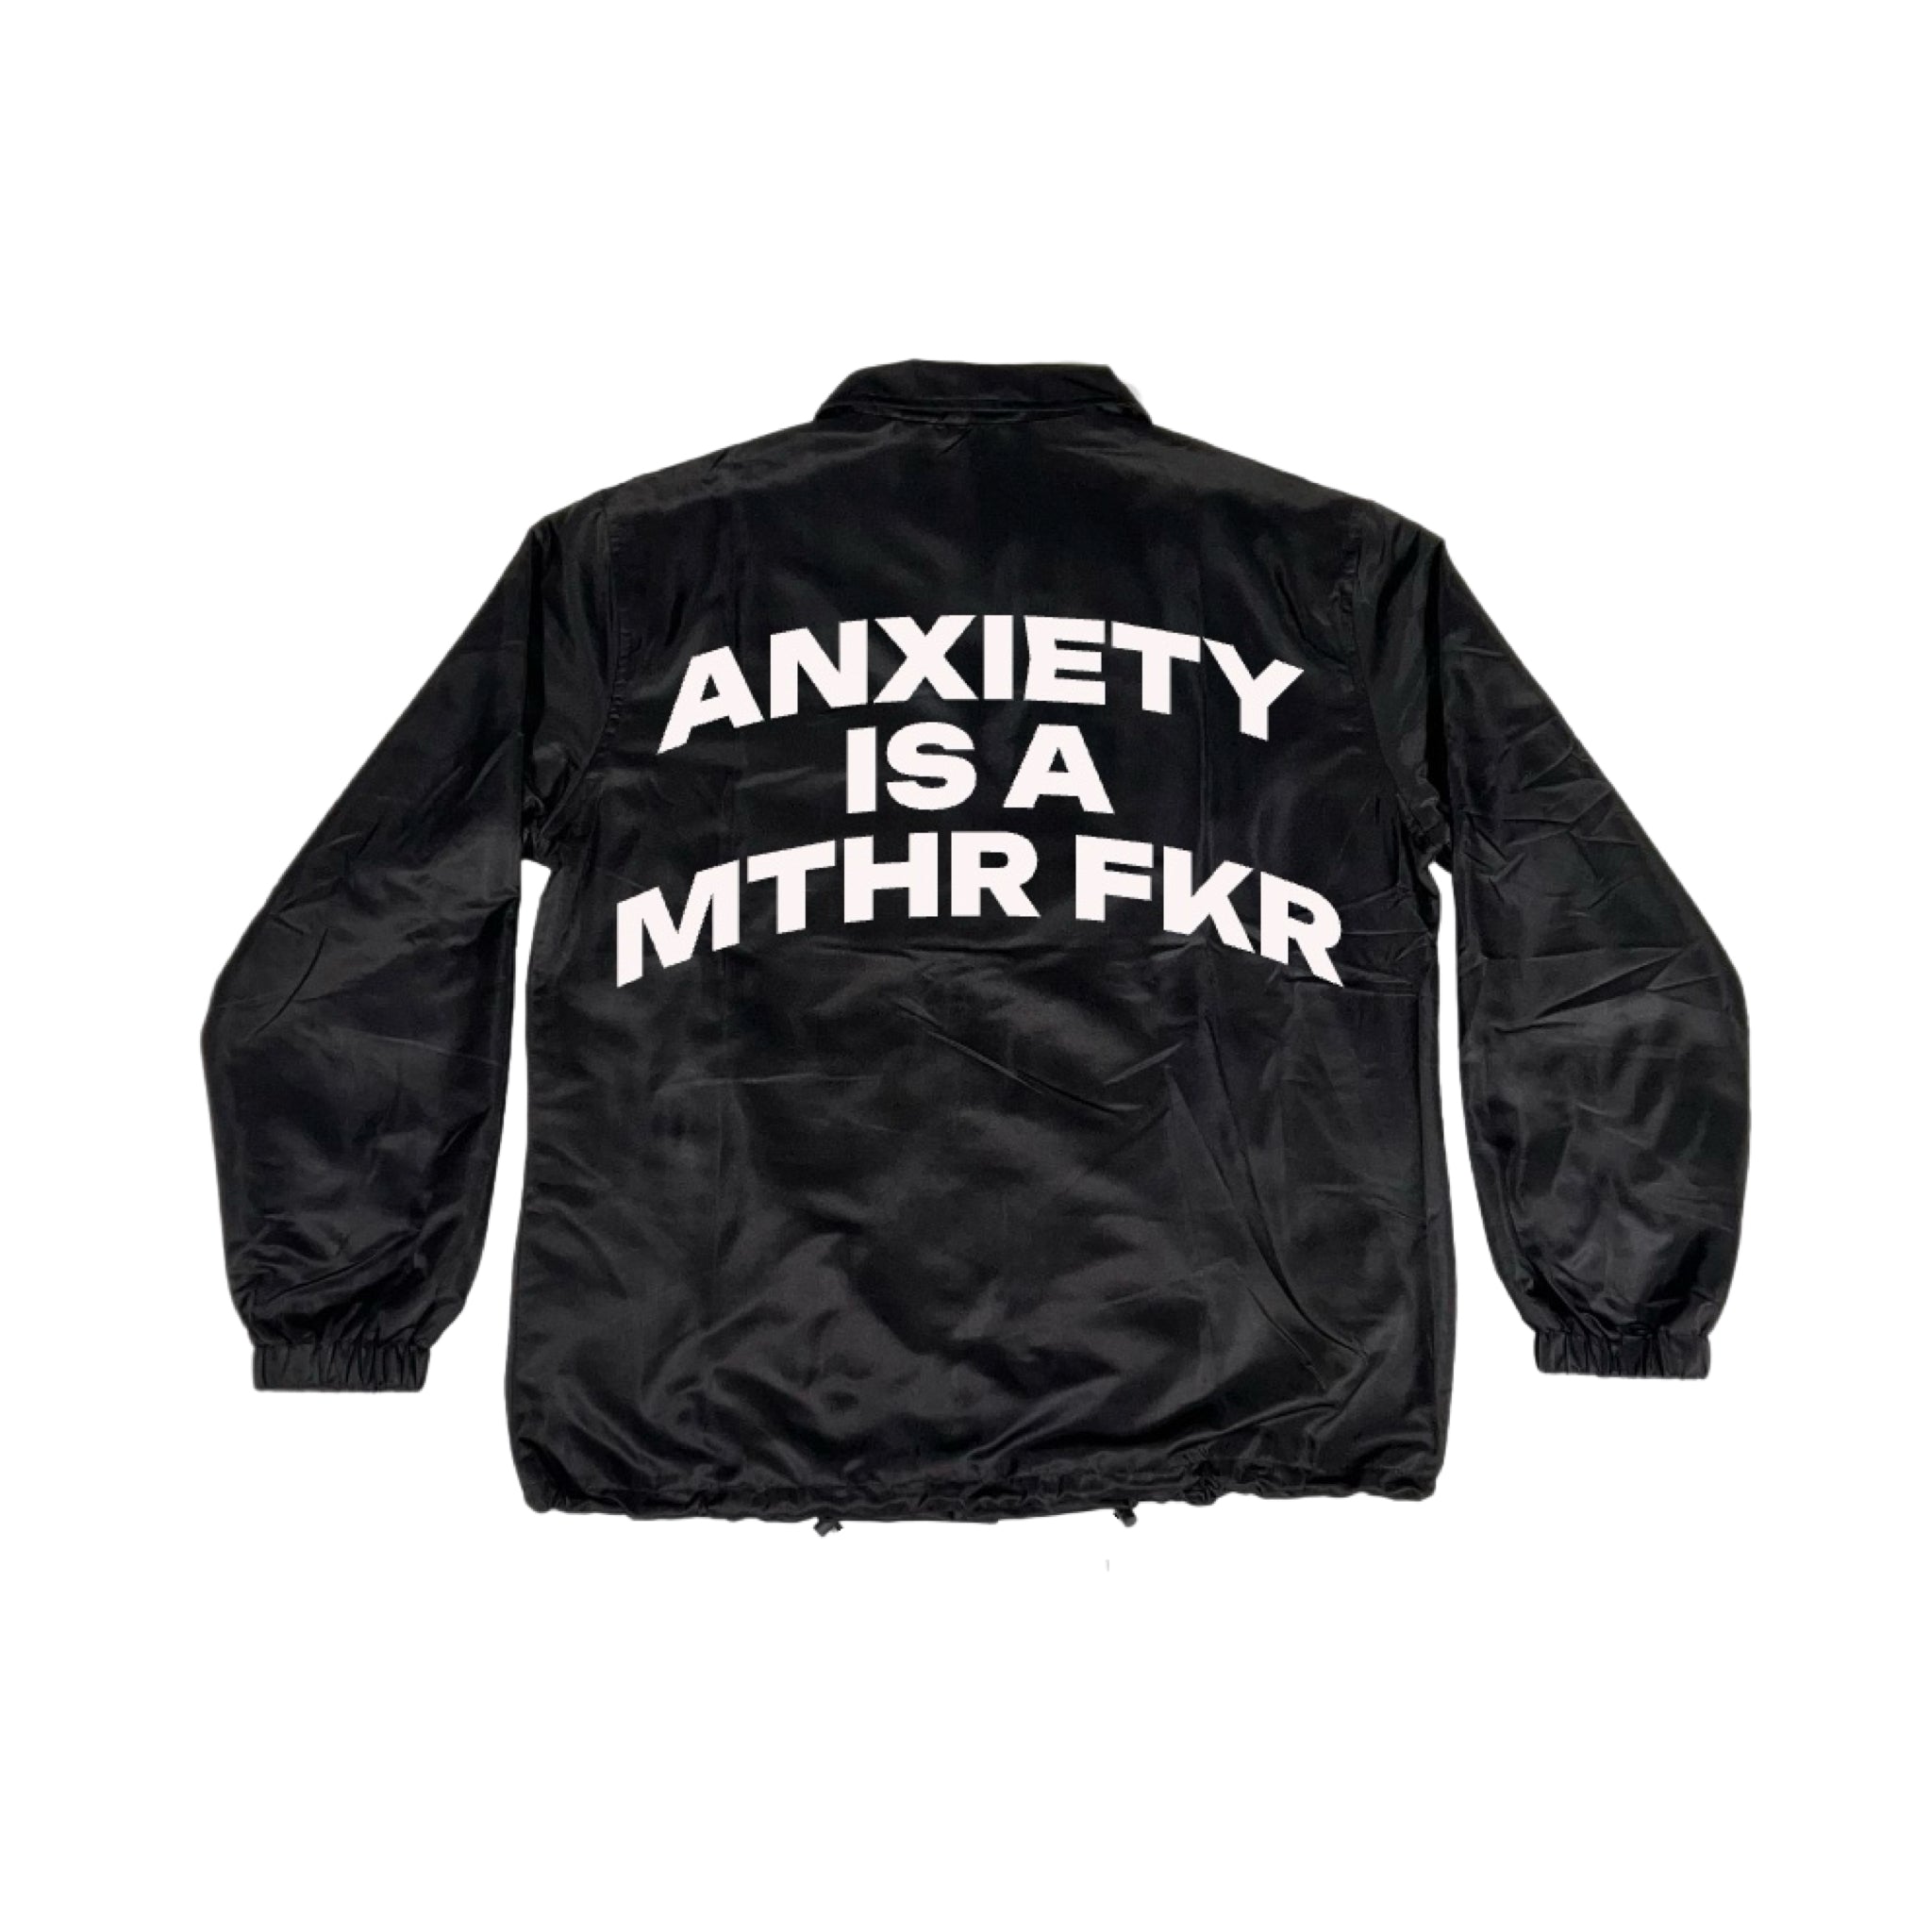 ANXIETY IS A MTHR FKR JACKET